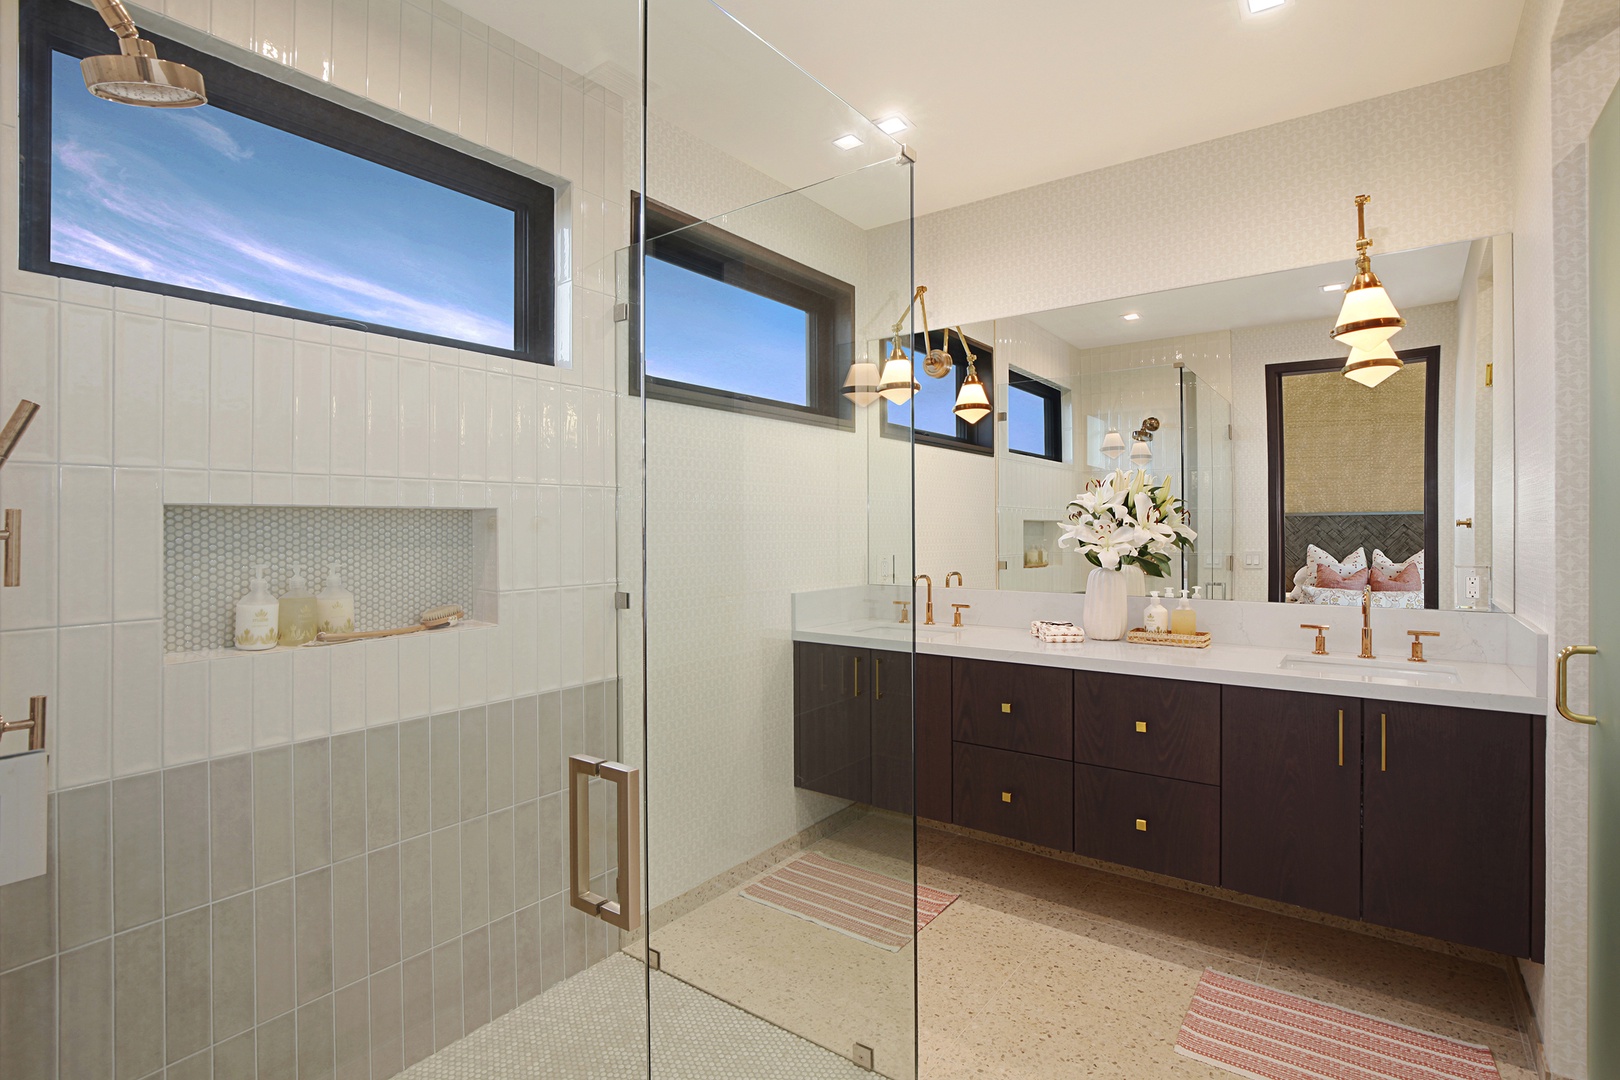 Koloa Vacation Rentals, Hale Mahina Hou - Ensuite bathroom with a shower in a glass enclosure and two sinks.